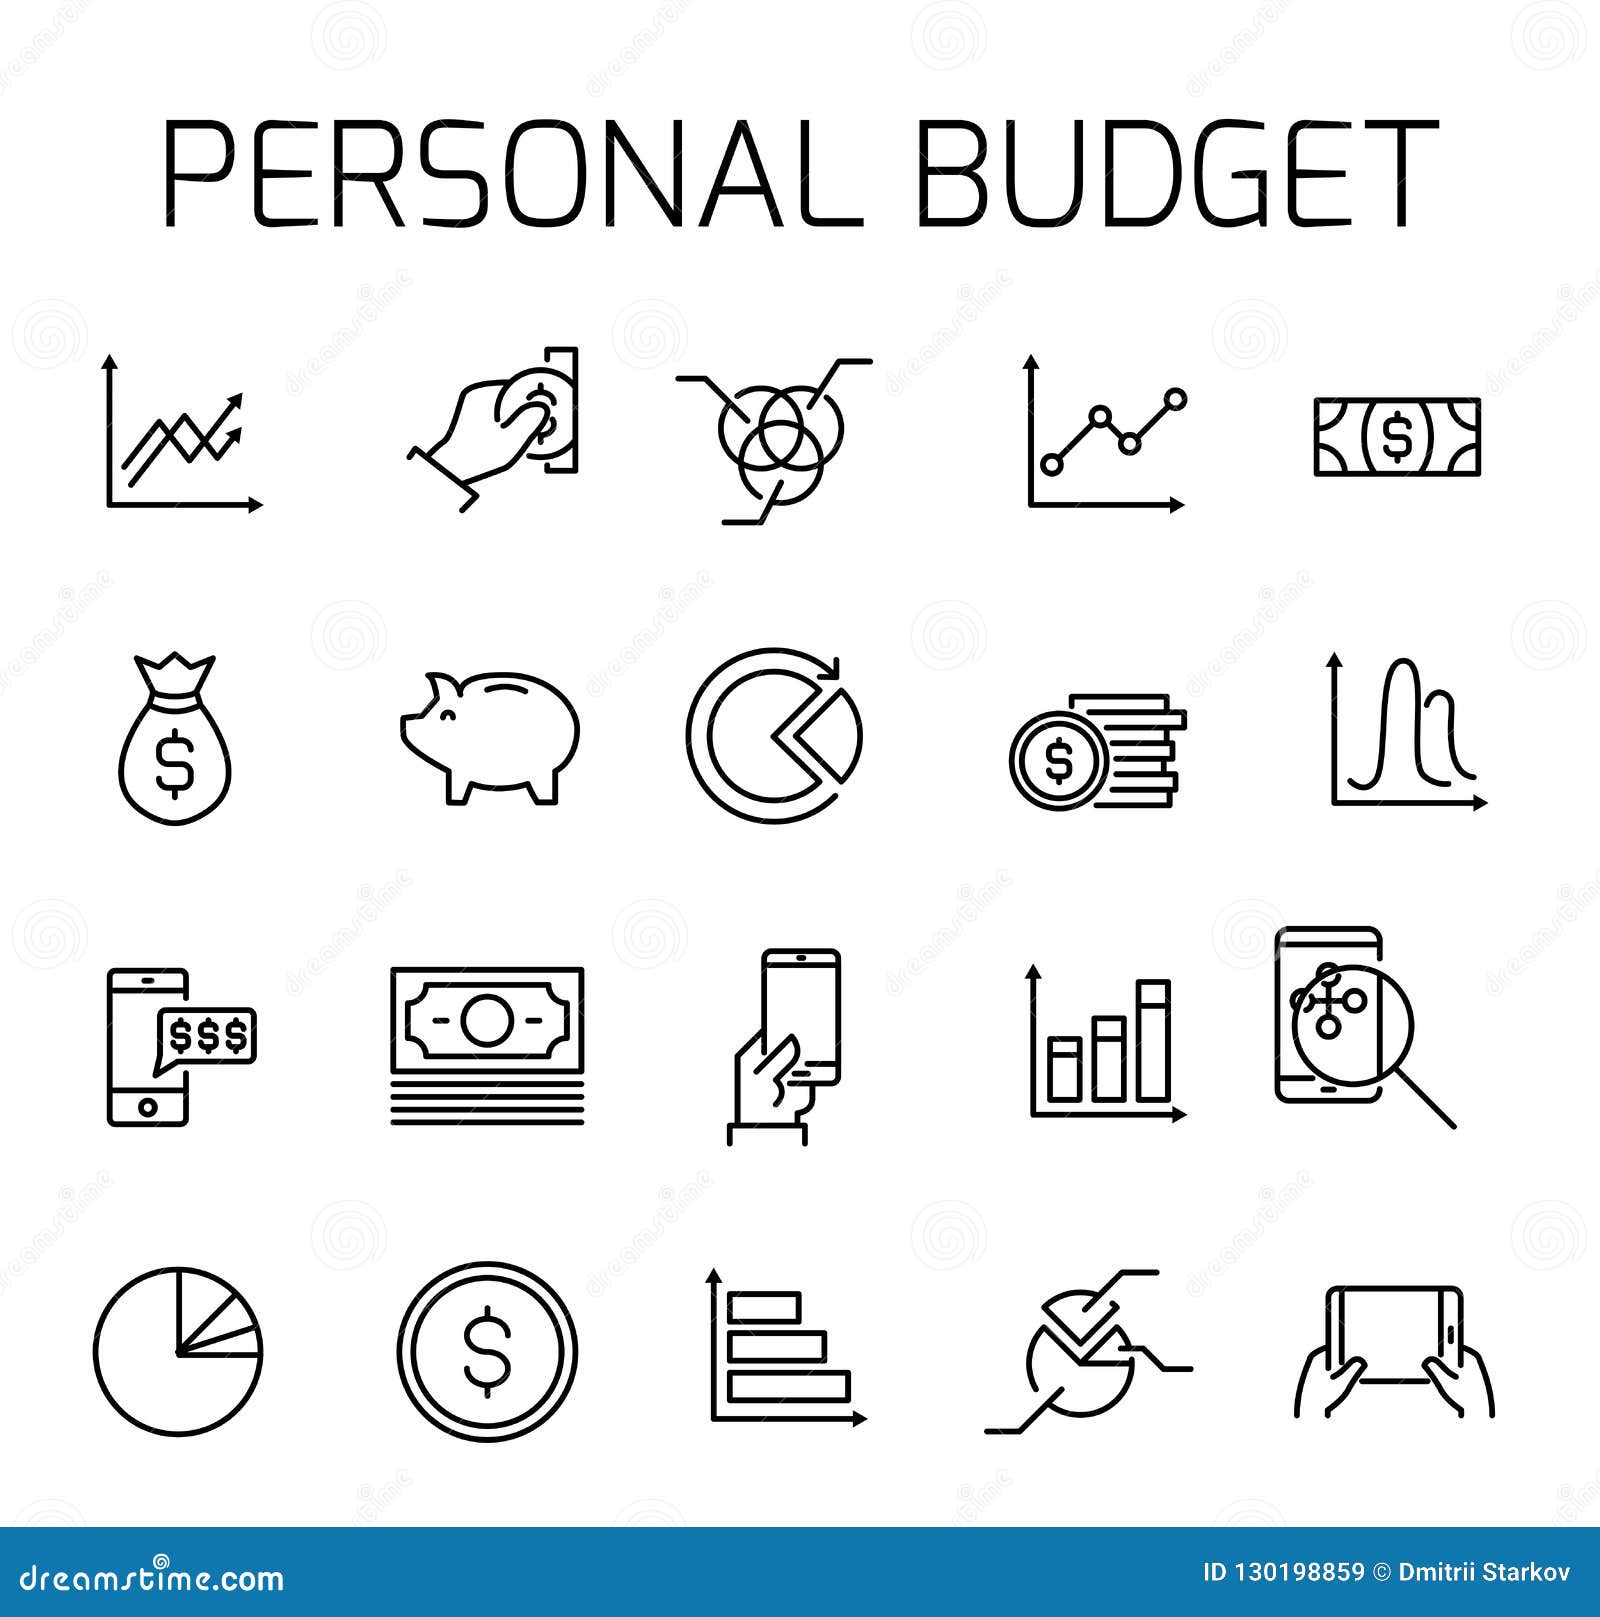 Personal Budget Chart